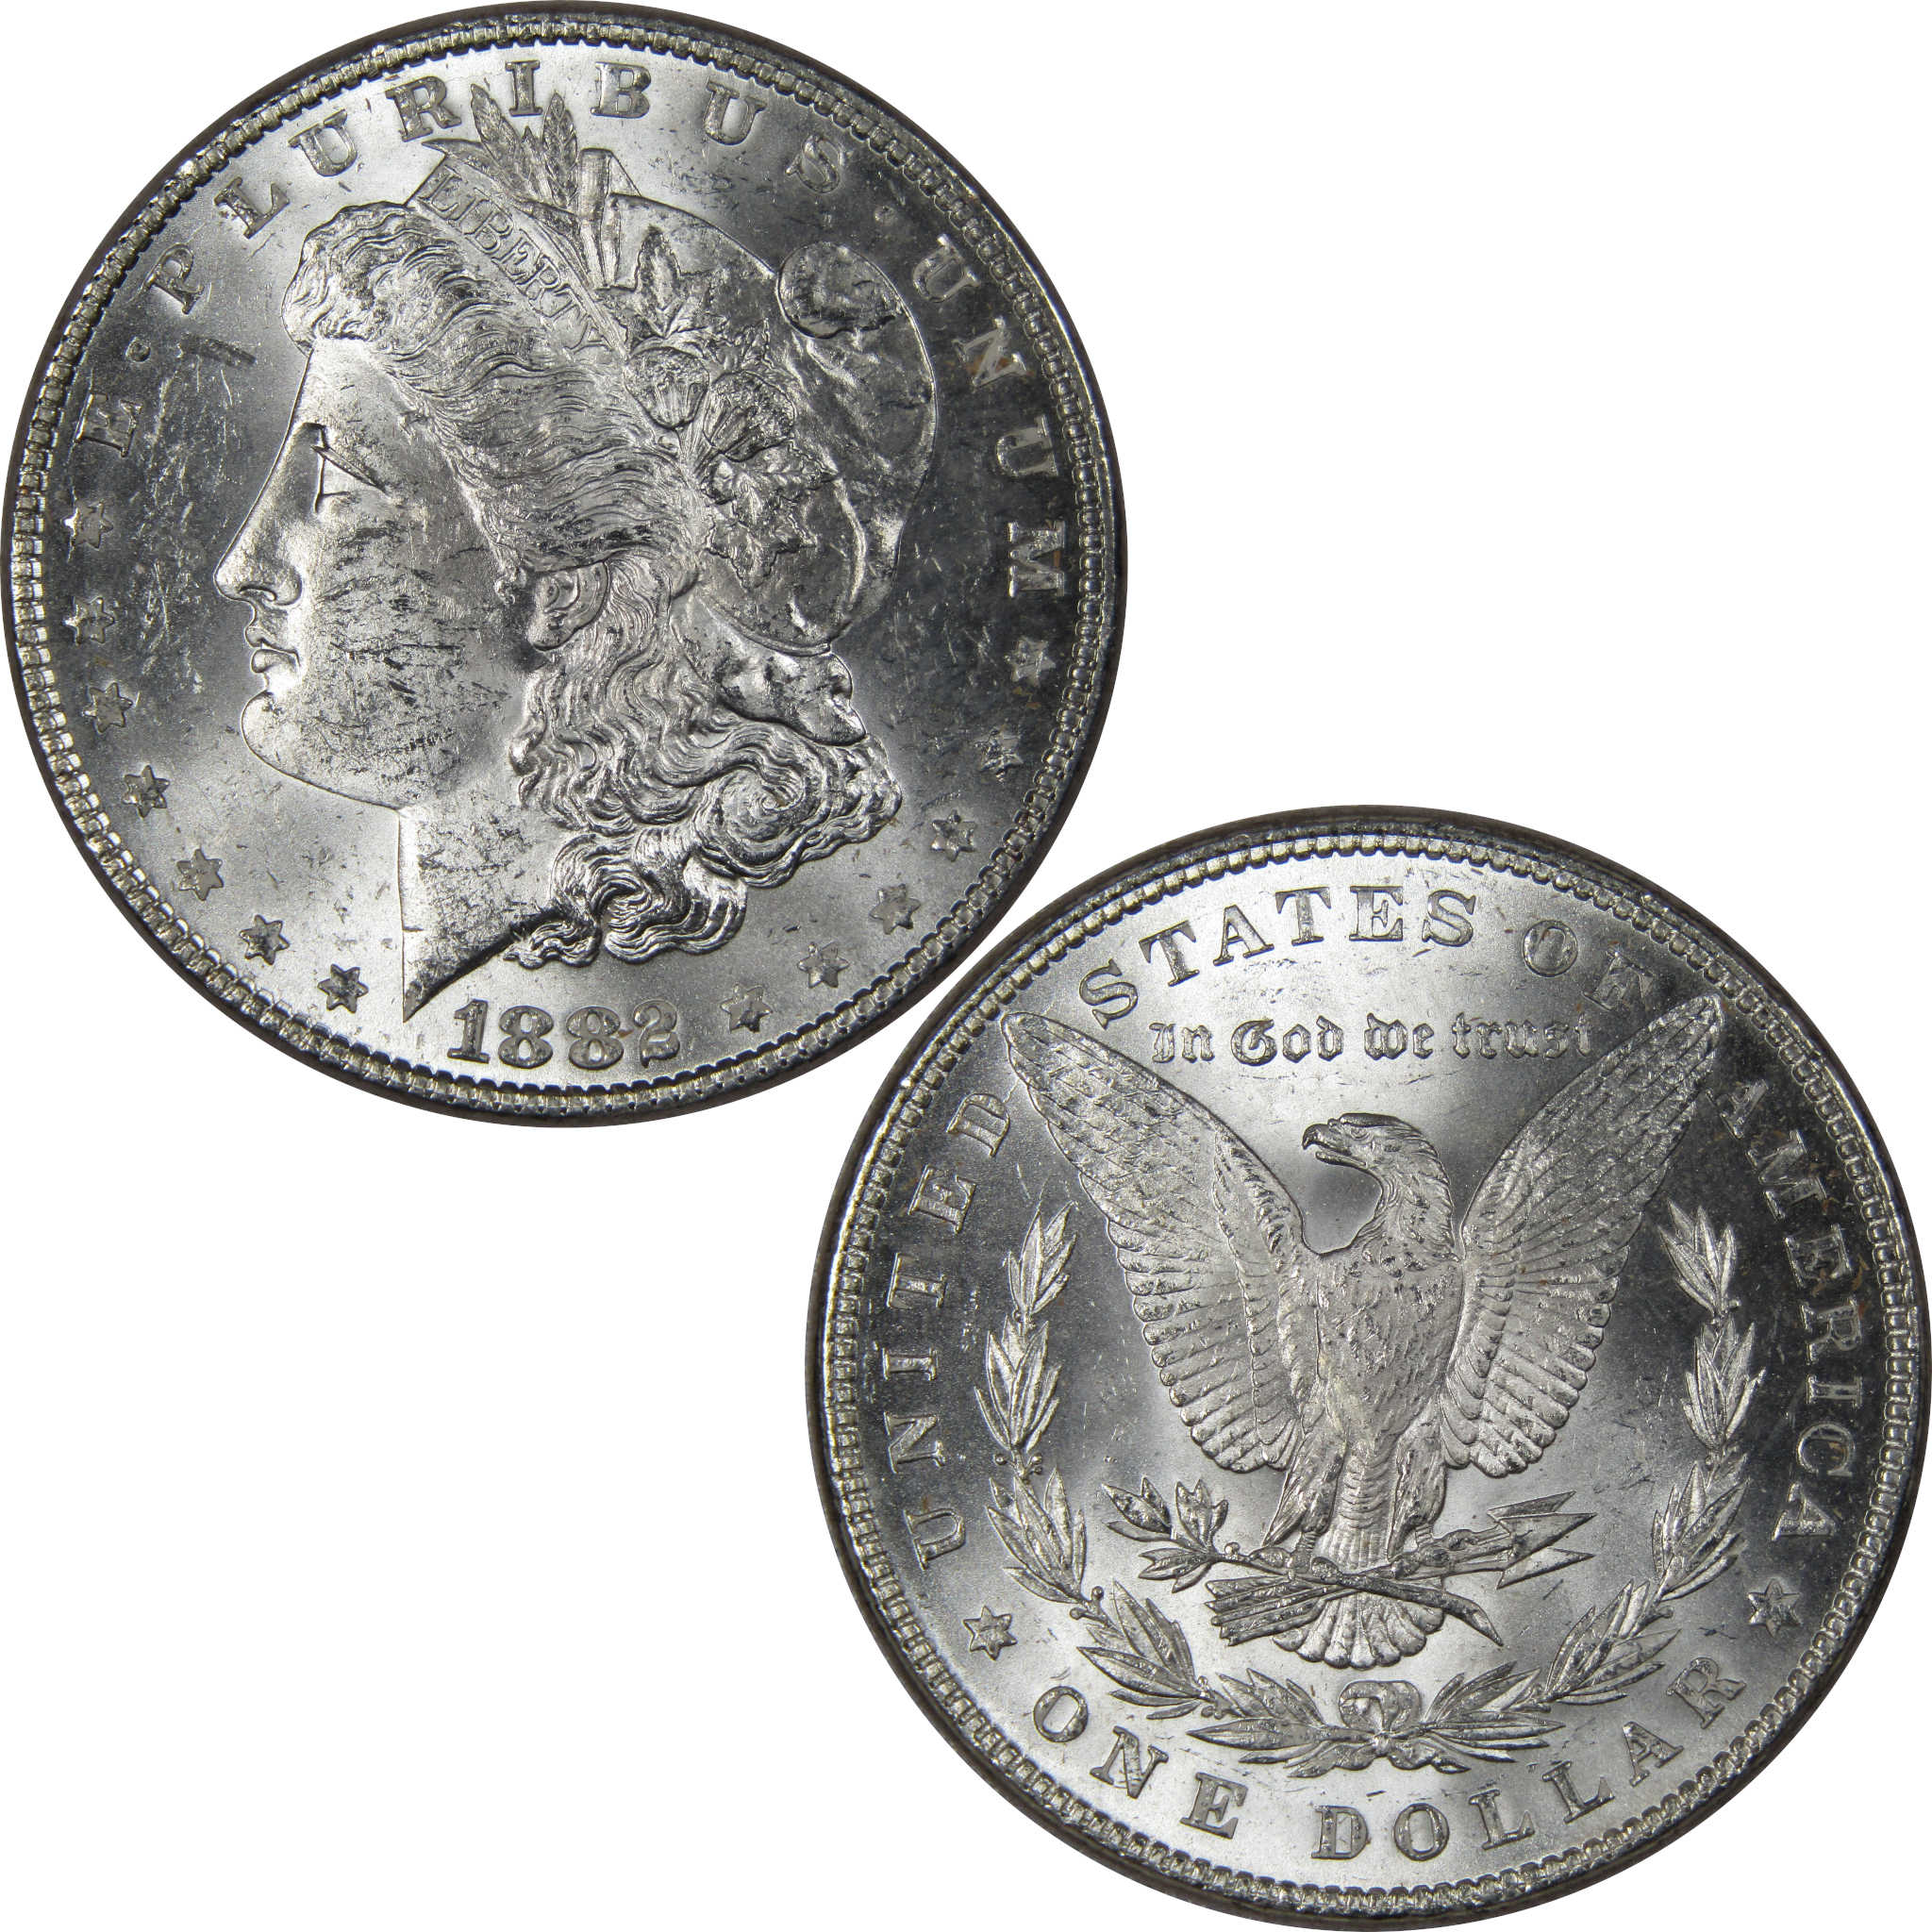 1882 Morgan Dollar BU Uncirculated Mint State 90% Silver SKU:IPC9656 - Morgan coin - Morgan silver dollar - Morgan silver dollar for sale - Profile Coins &amp; Collectibles